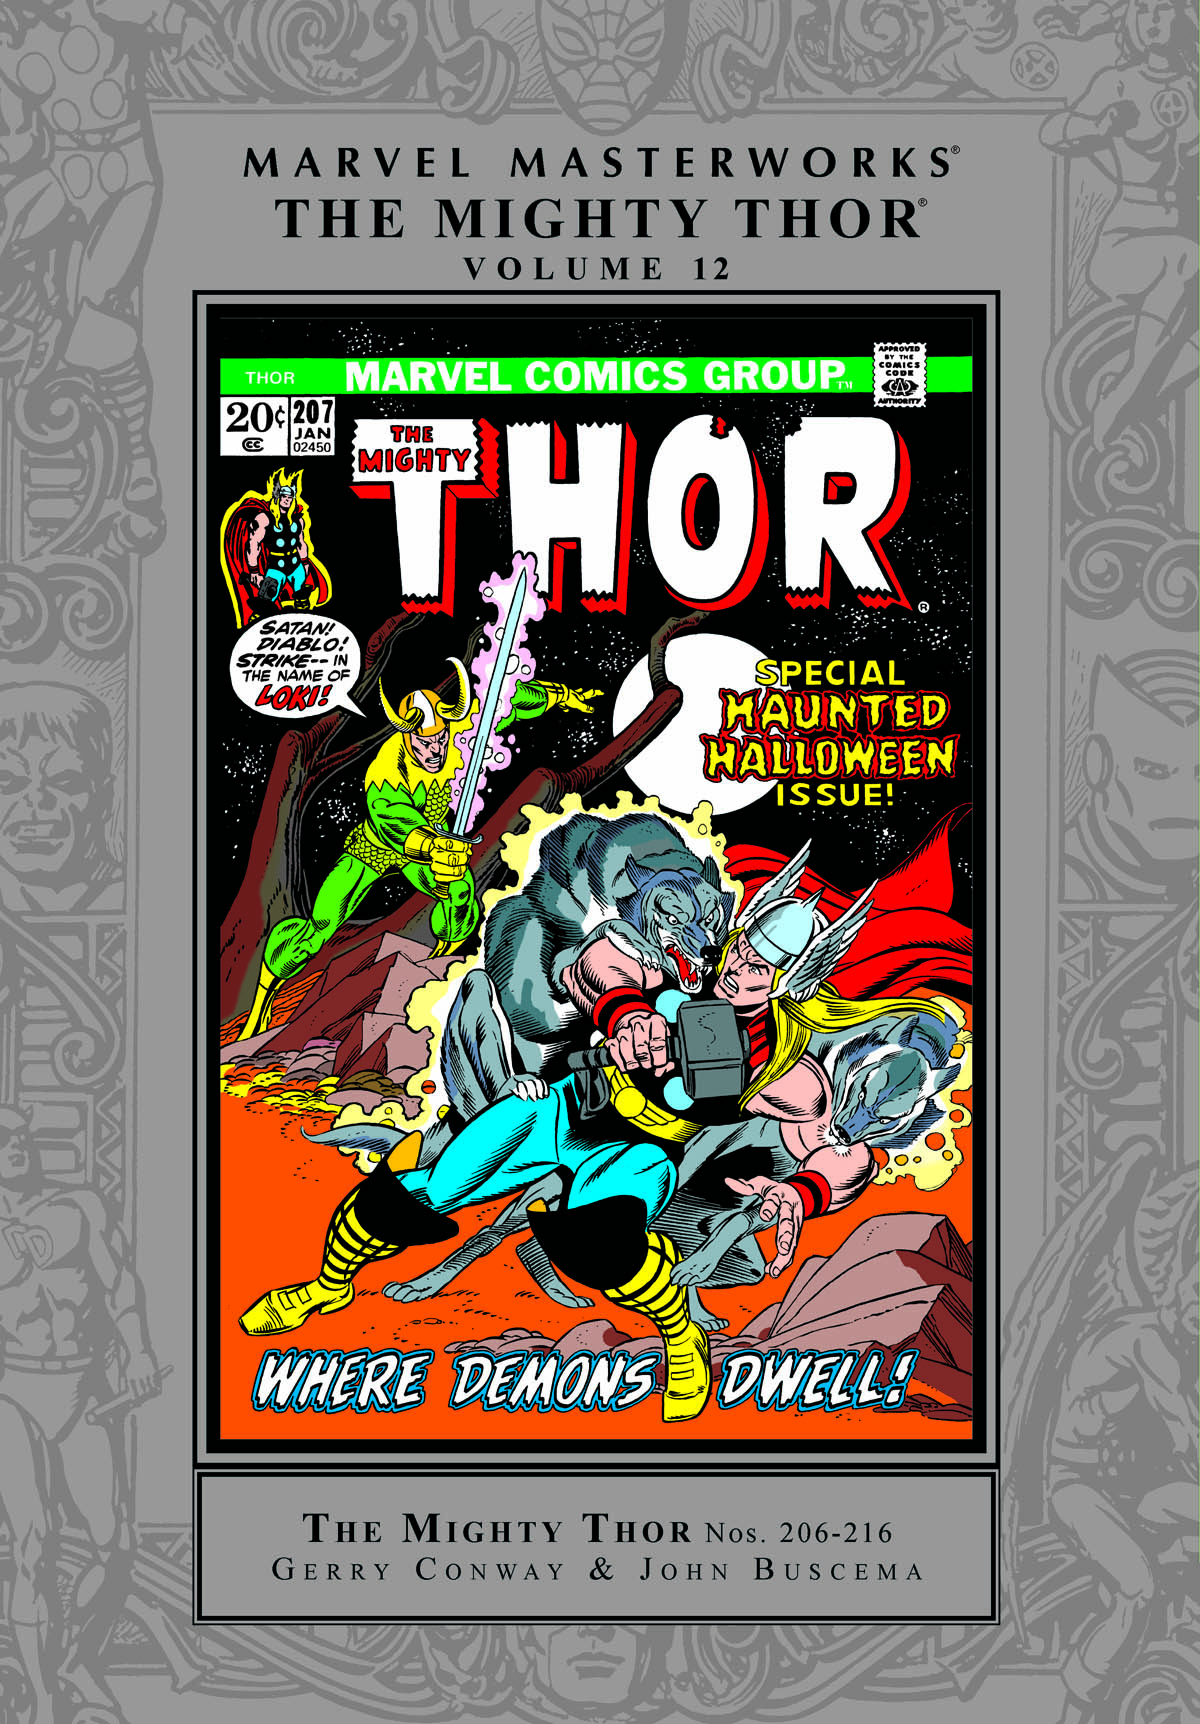 MARVEL MASTERWORKS: THE MIGHTY THOR VOL. 12 HC (Trade Paperback)